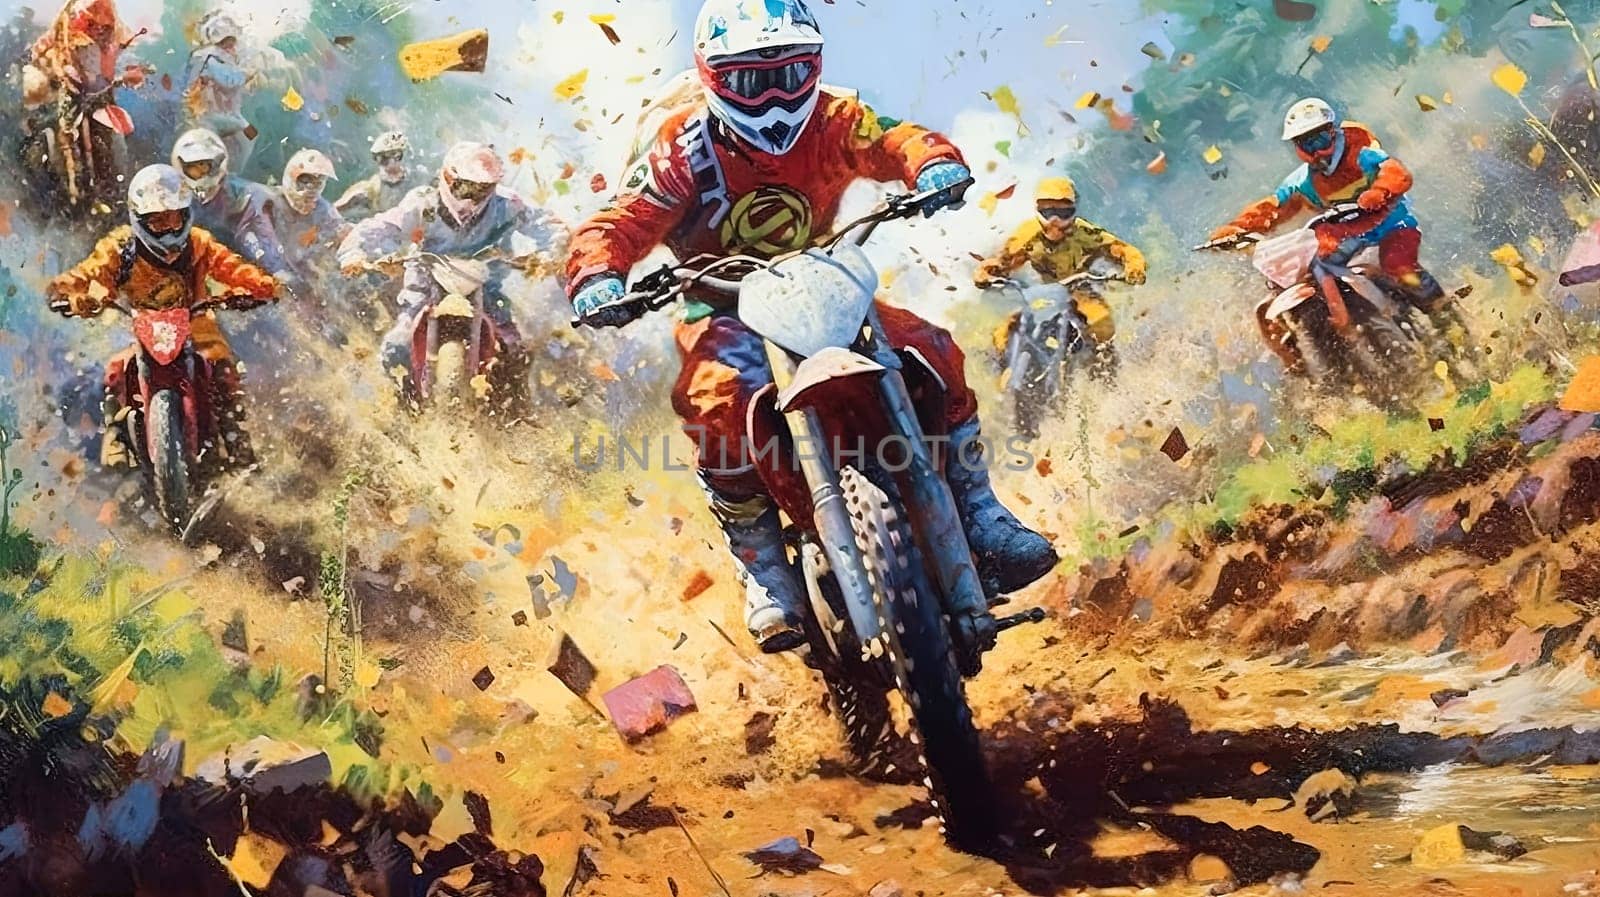 A man is riding a dirt bike through a field of colorful balloons. The scene is lively and fun, with the balloons adding a festive touch to the image